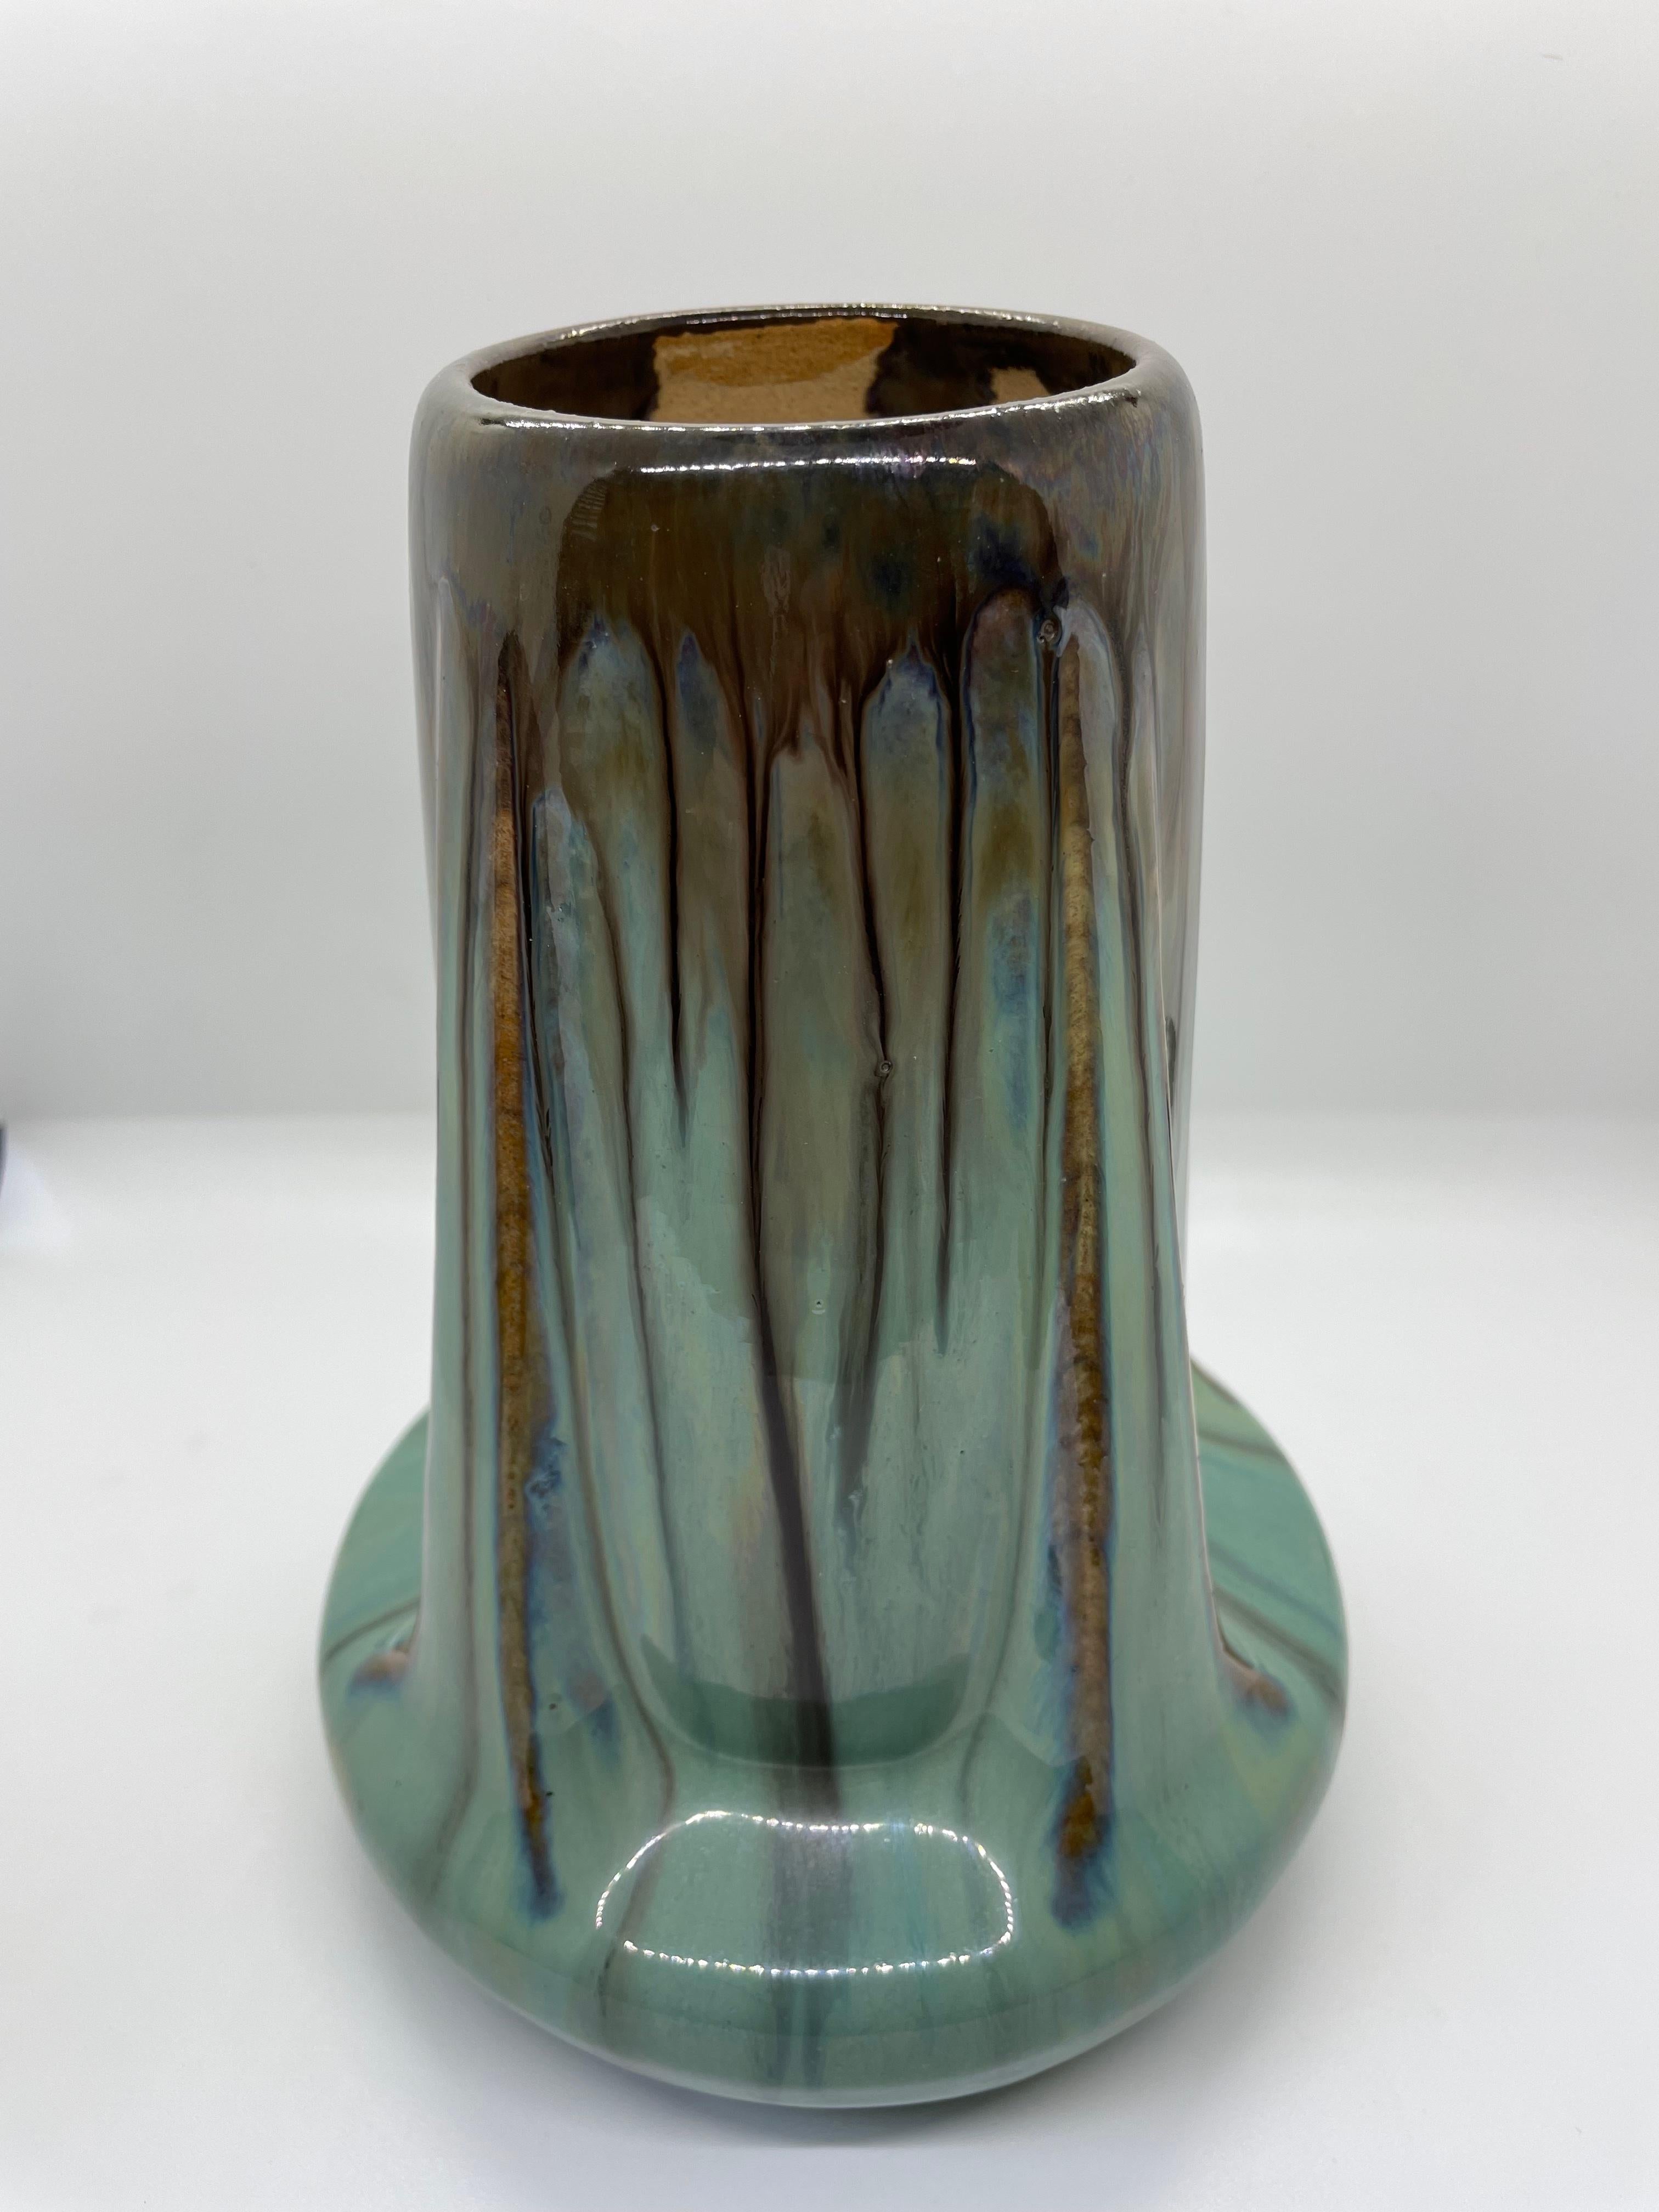 Fulper Buttress vase in gorgeous shades of green and brown. Lovely example of early 20th century American art pottery, made in New Jersey. a few tiny 'flea bites' in the glaze are from the original manufacturing process. Fantastic accent piece or